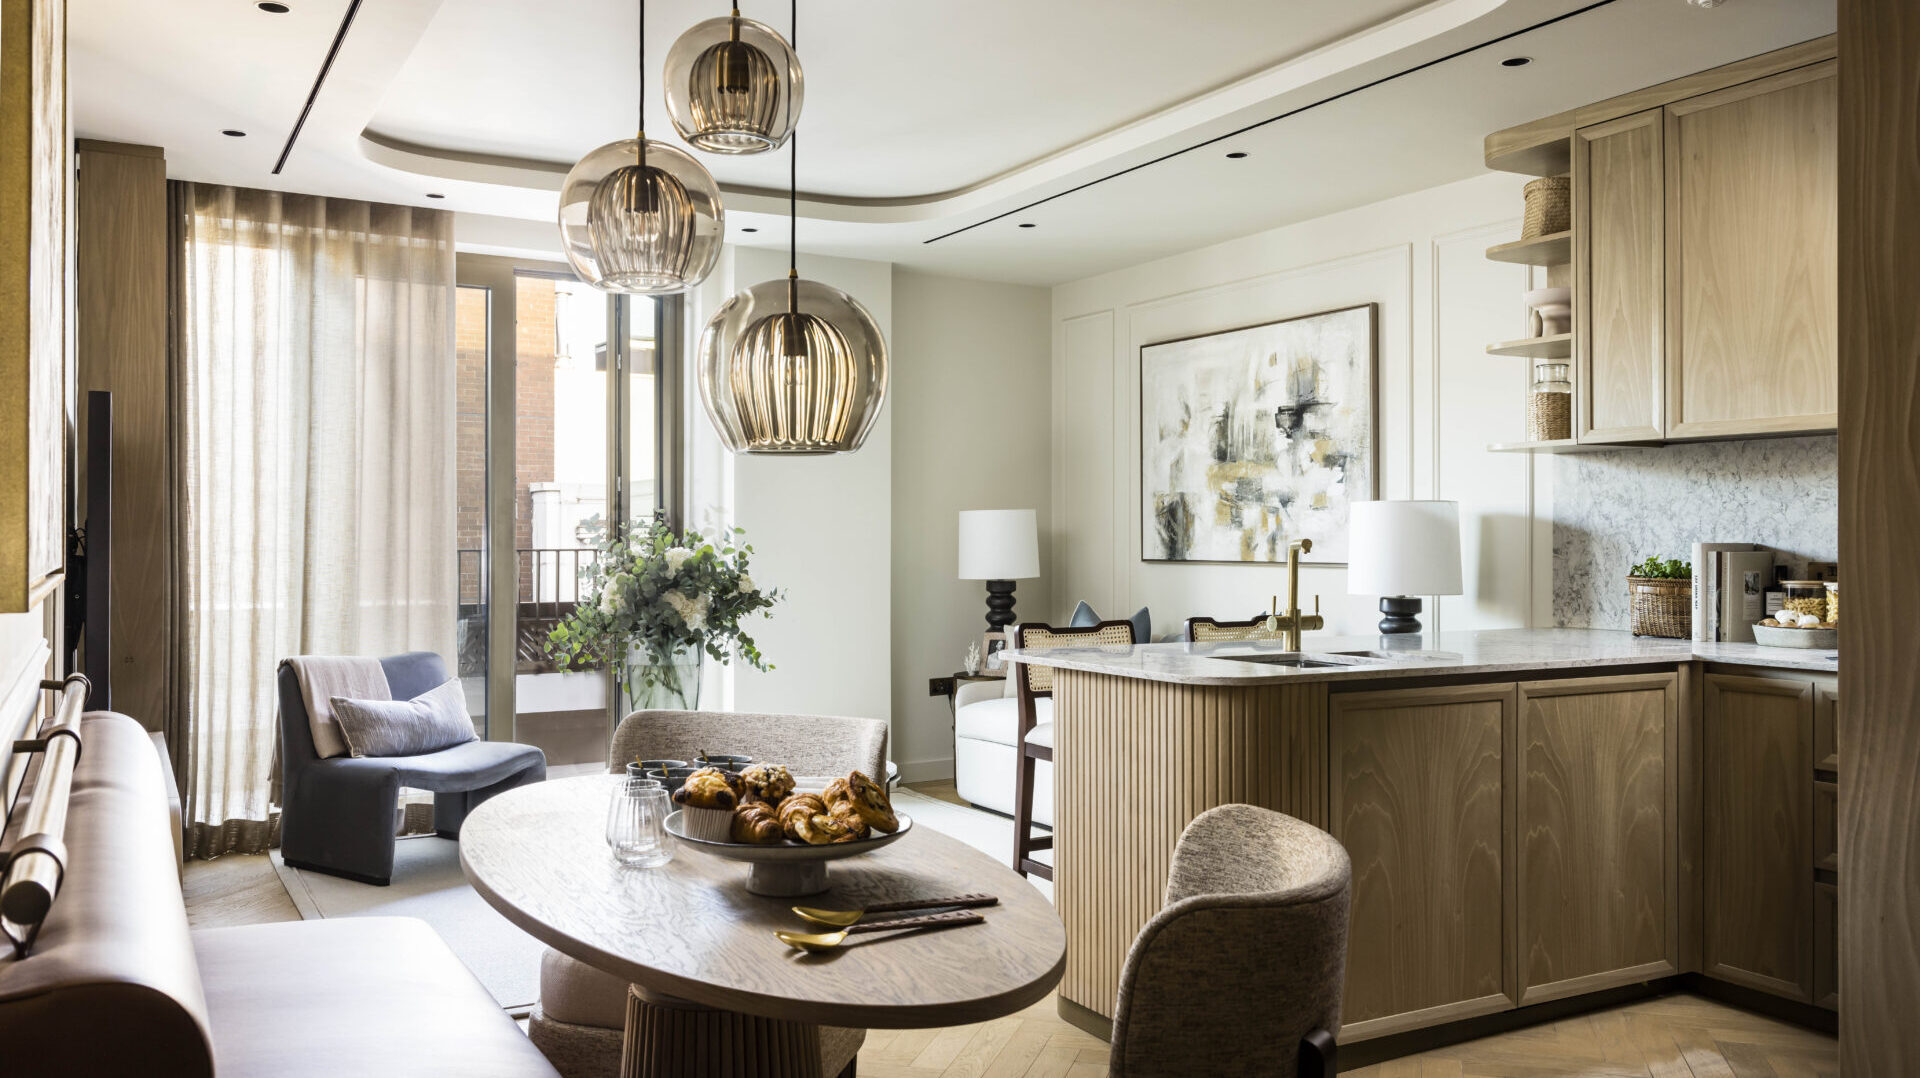 A living and kitchen area in at a TCRW SOHO penthouse.